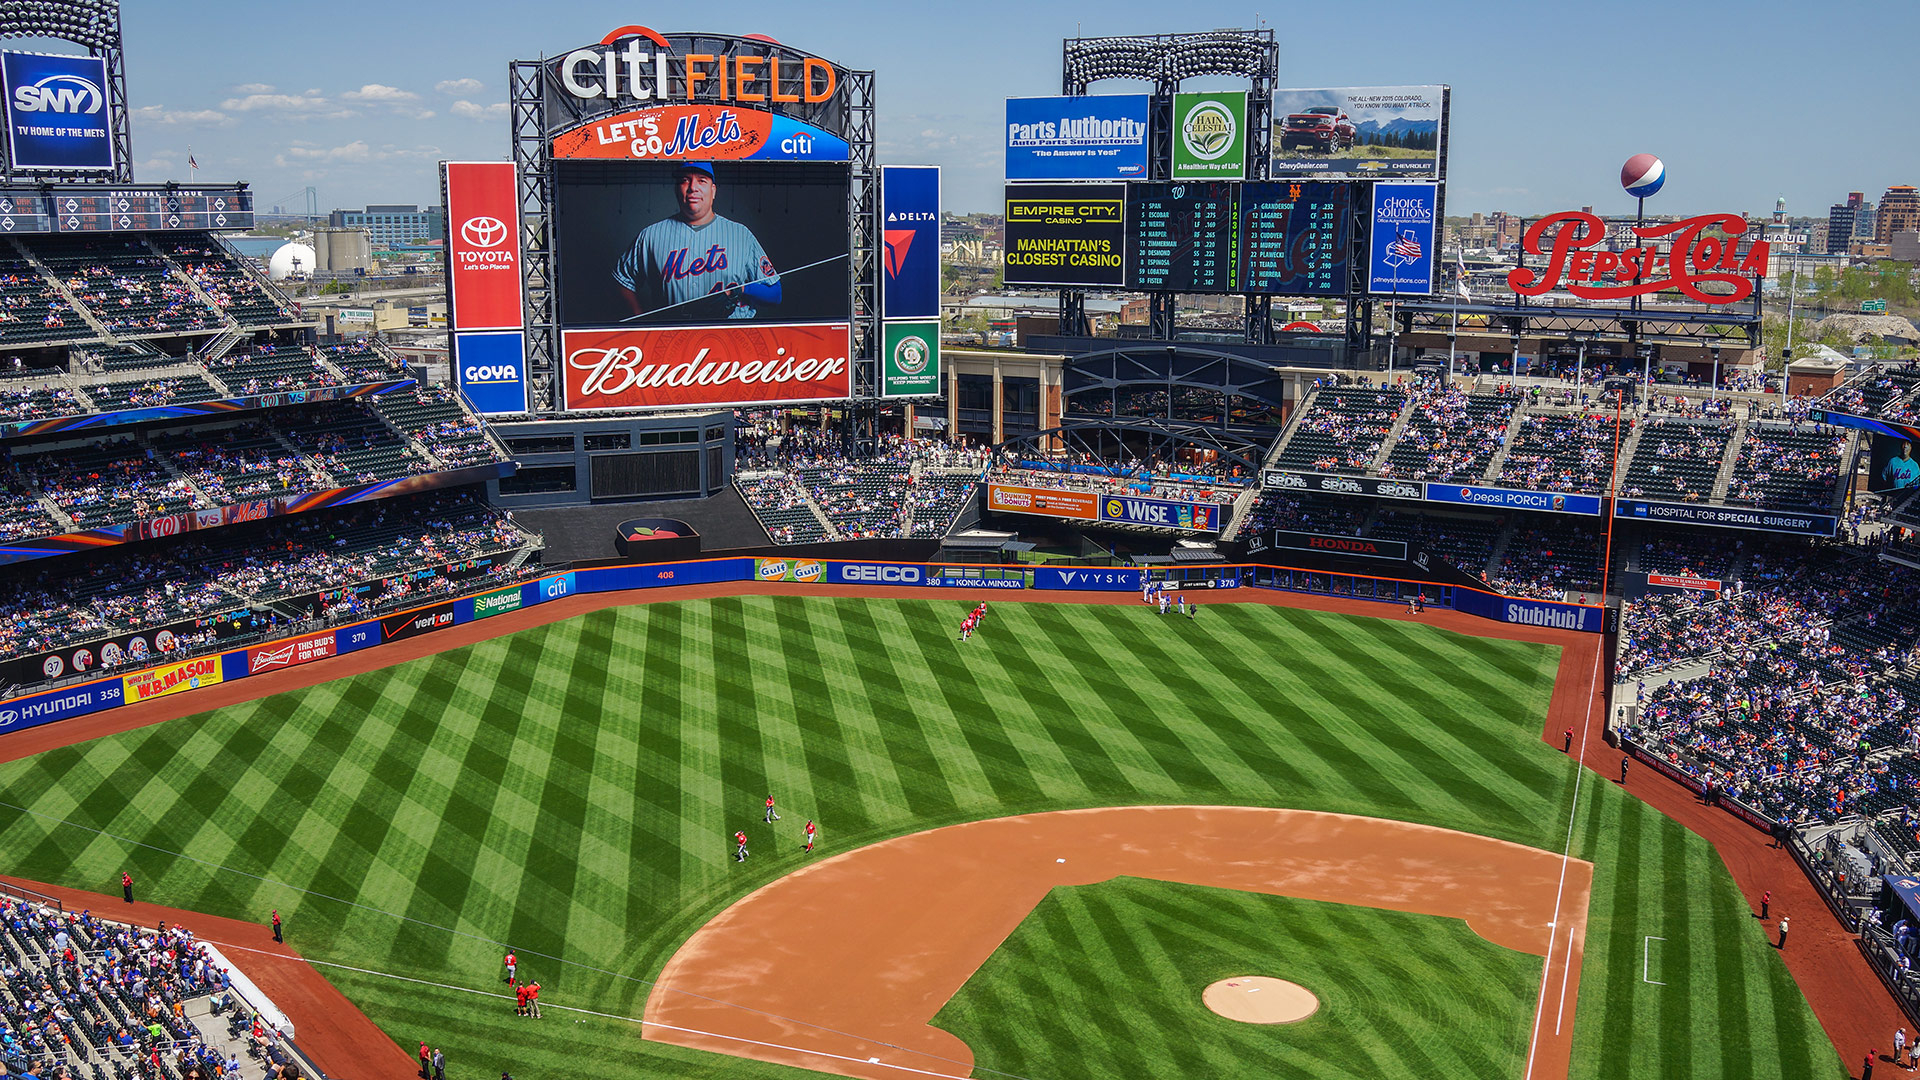 1920x1080 Mets Game at Citifield Purchase Tickets | Vaughn College